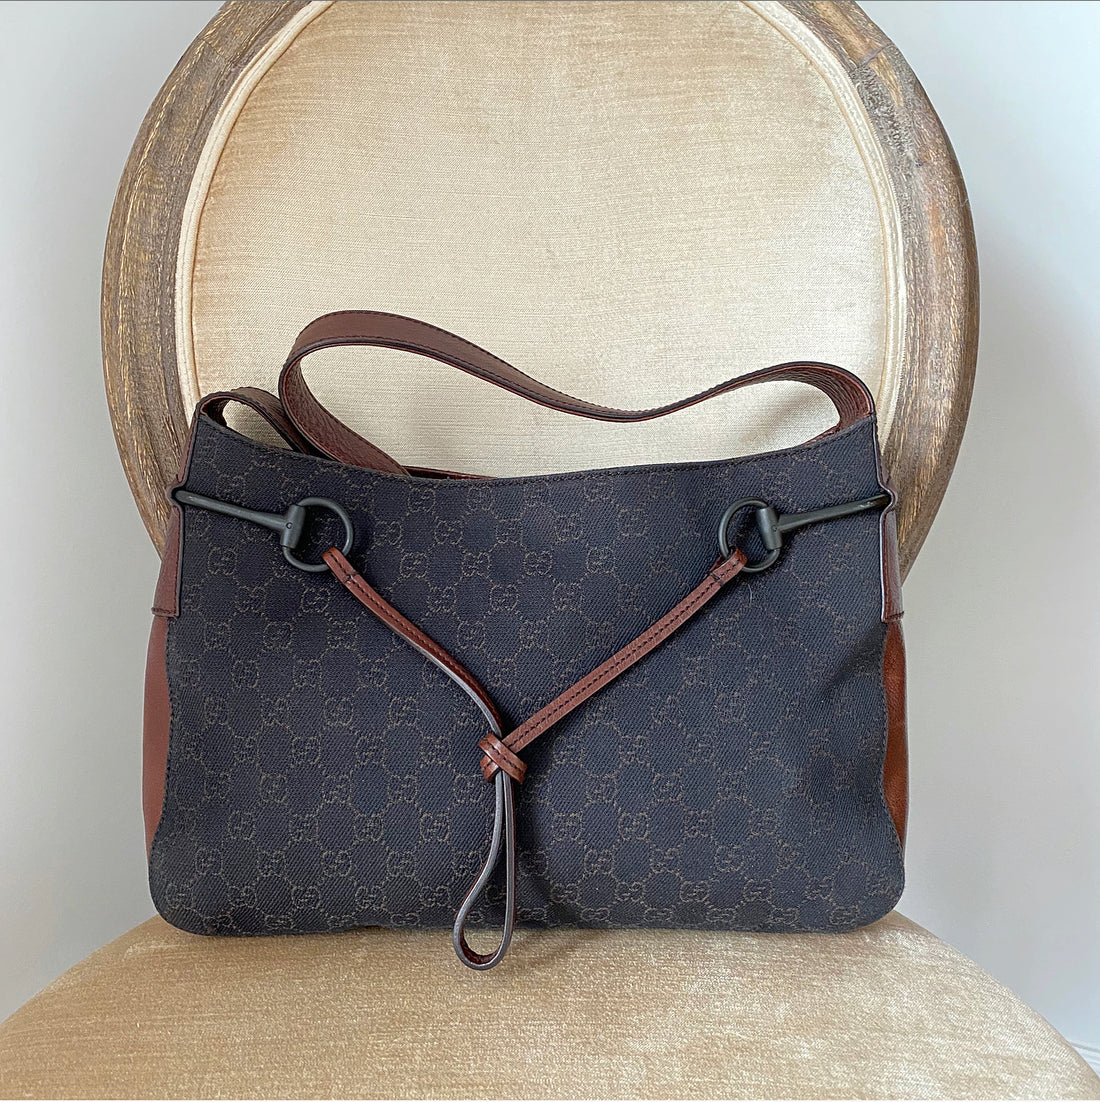 Gucci Brown Leather and Monogram Canvas Horsebit Hobo Bag – I MISS YOU VINTAGE